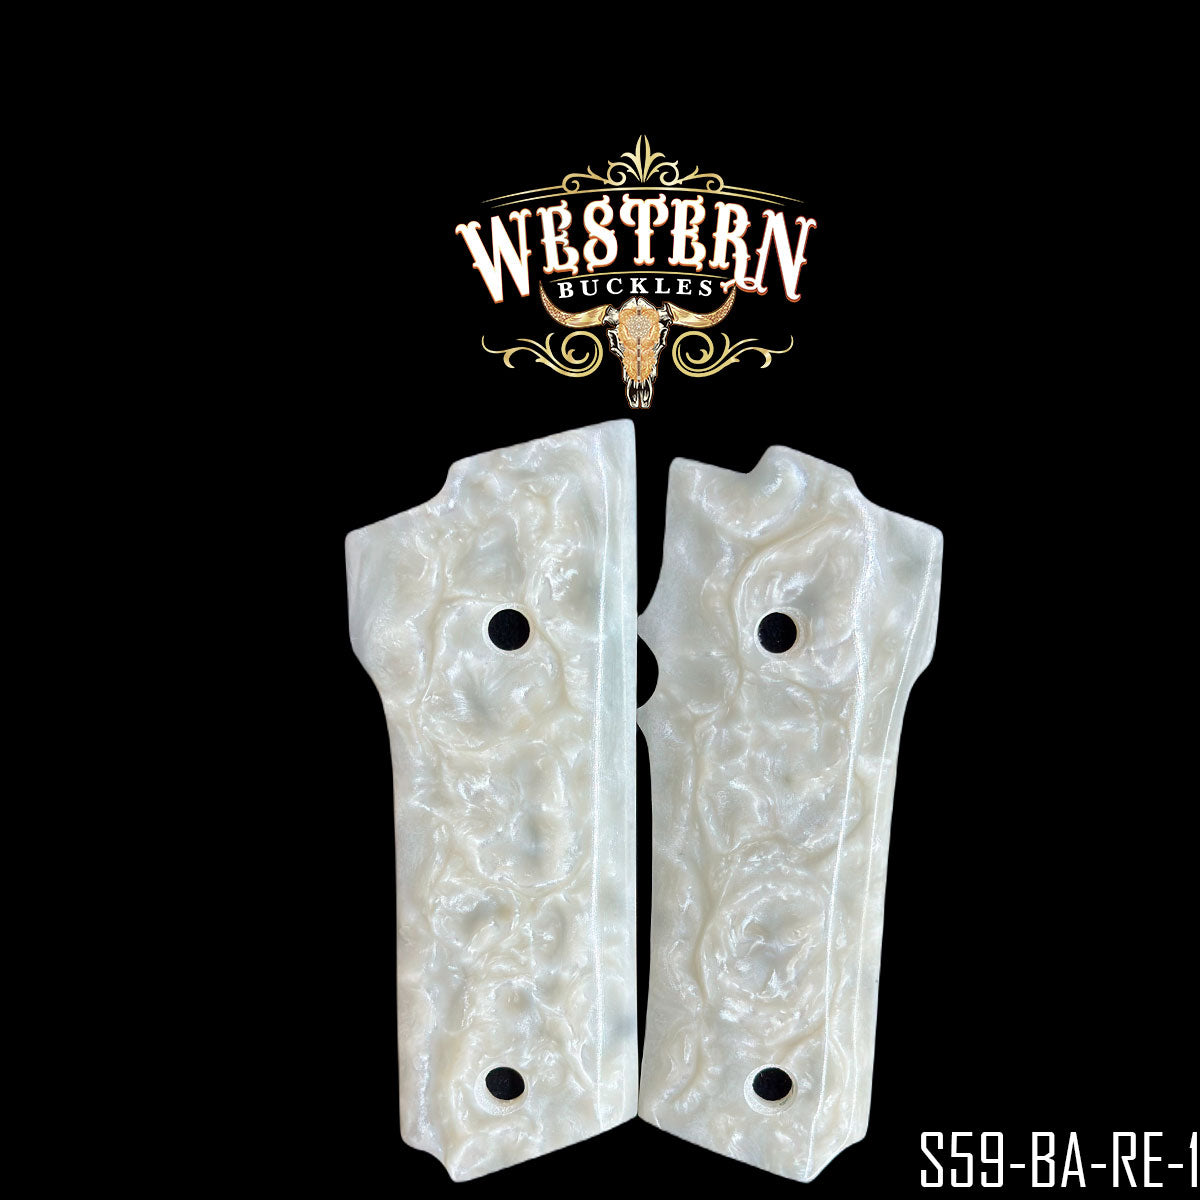 Cachas Smith and Wesson 59 Grips De Resina Blanca